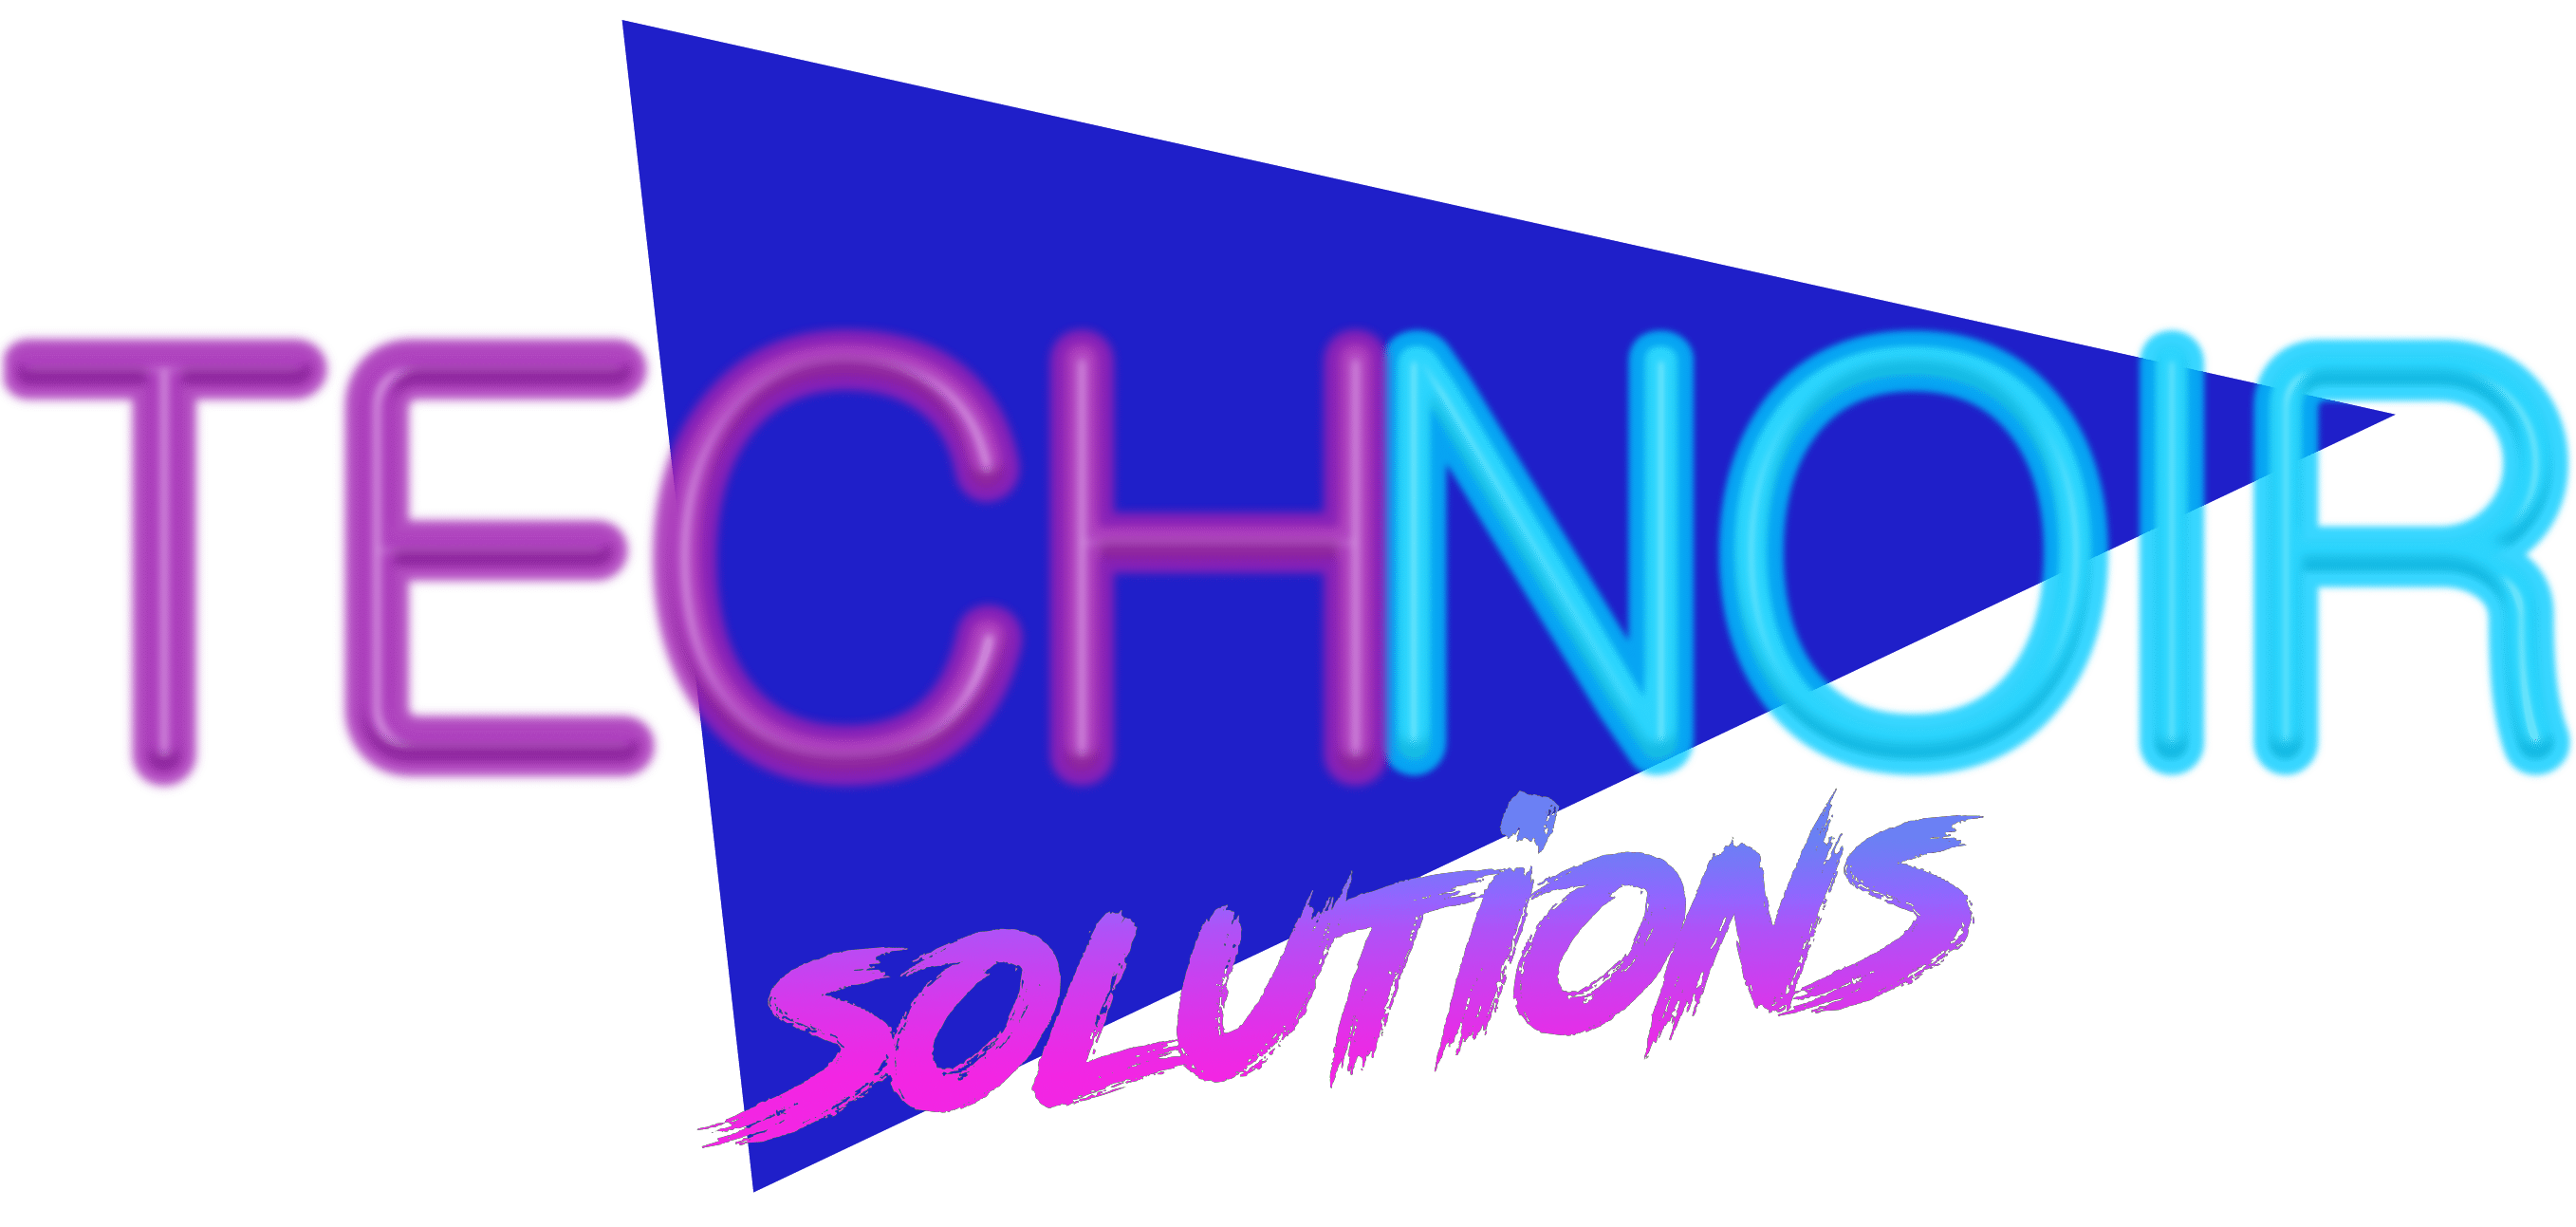 TechNoir Solutions review